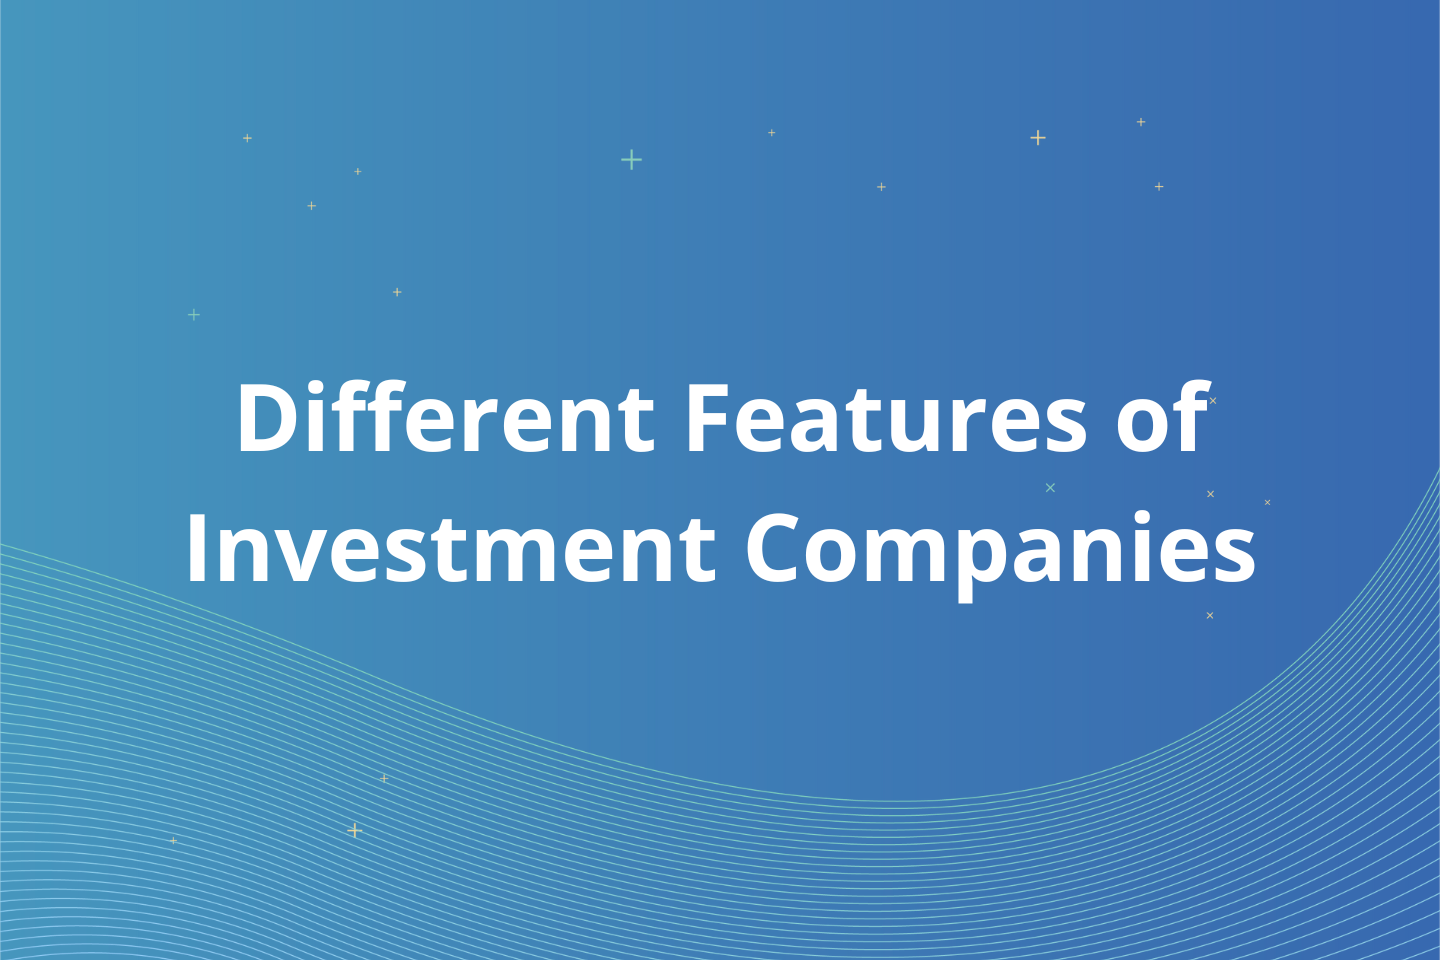 What Is The Difference Between Different Features of Investment Companies?